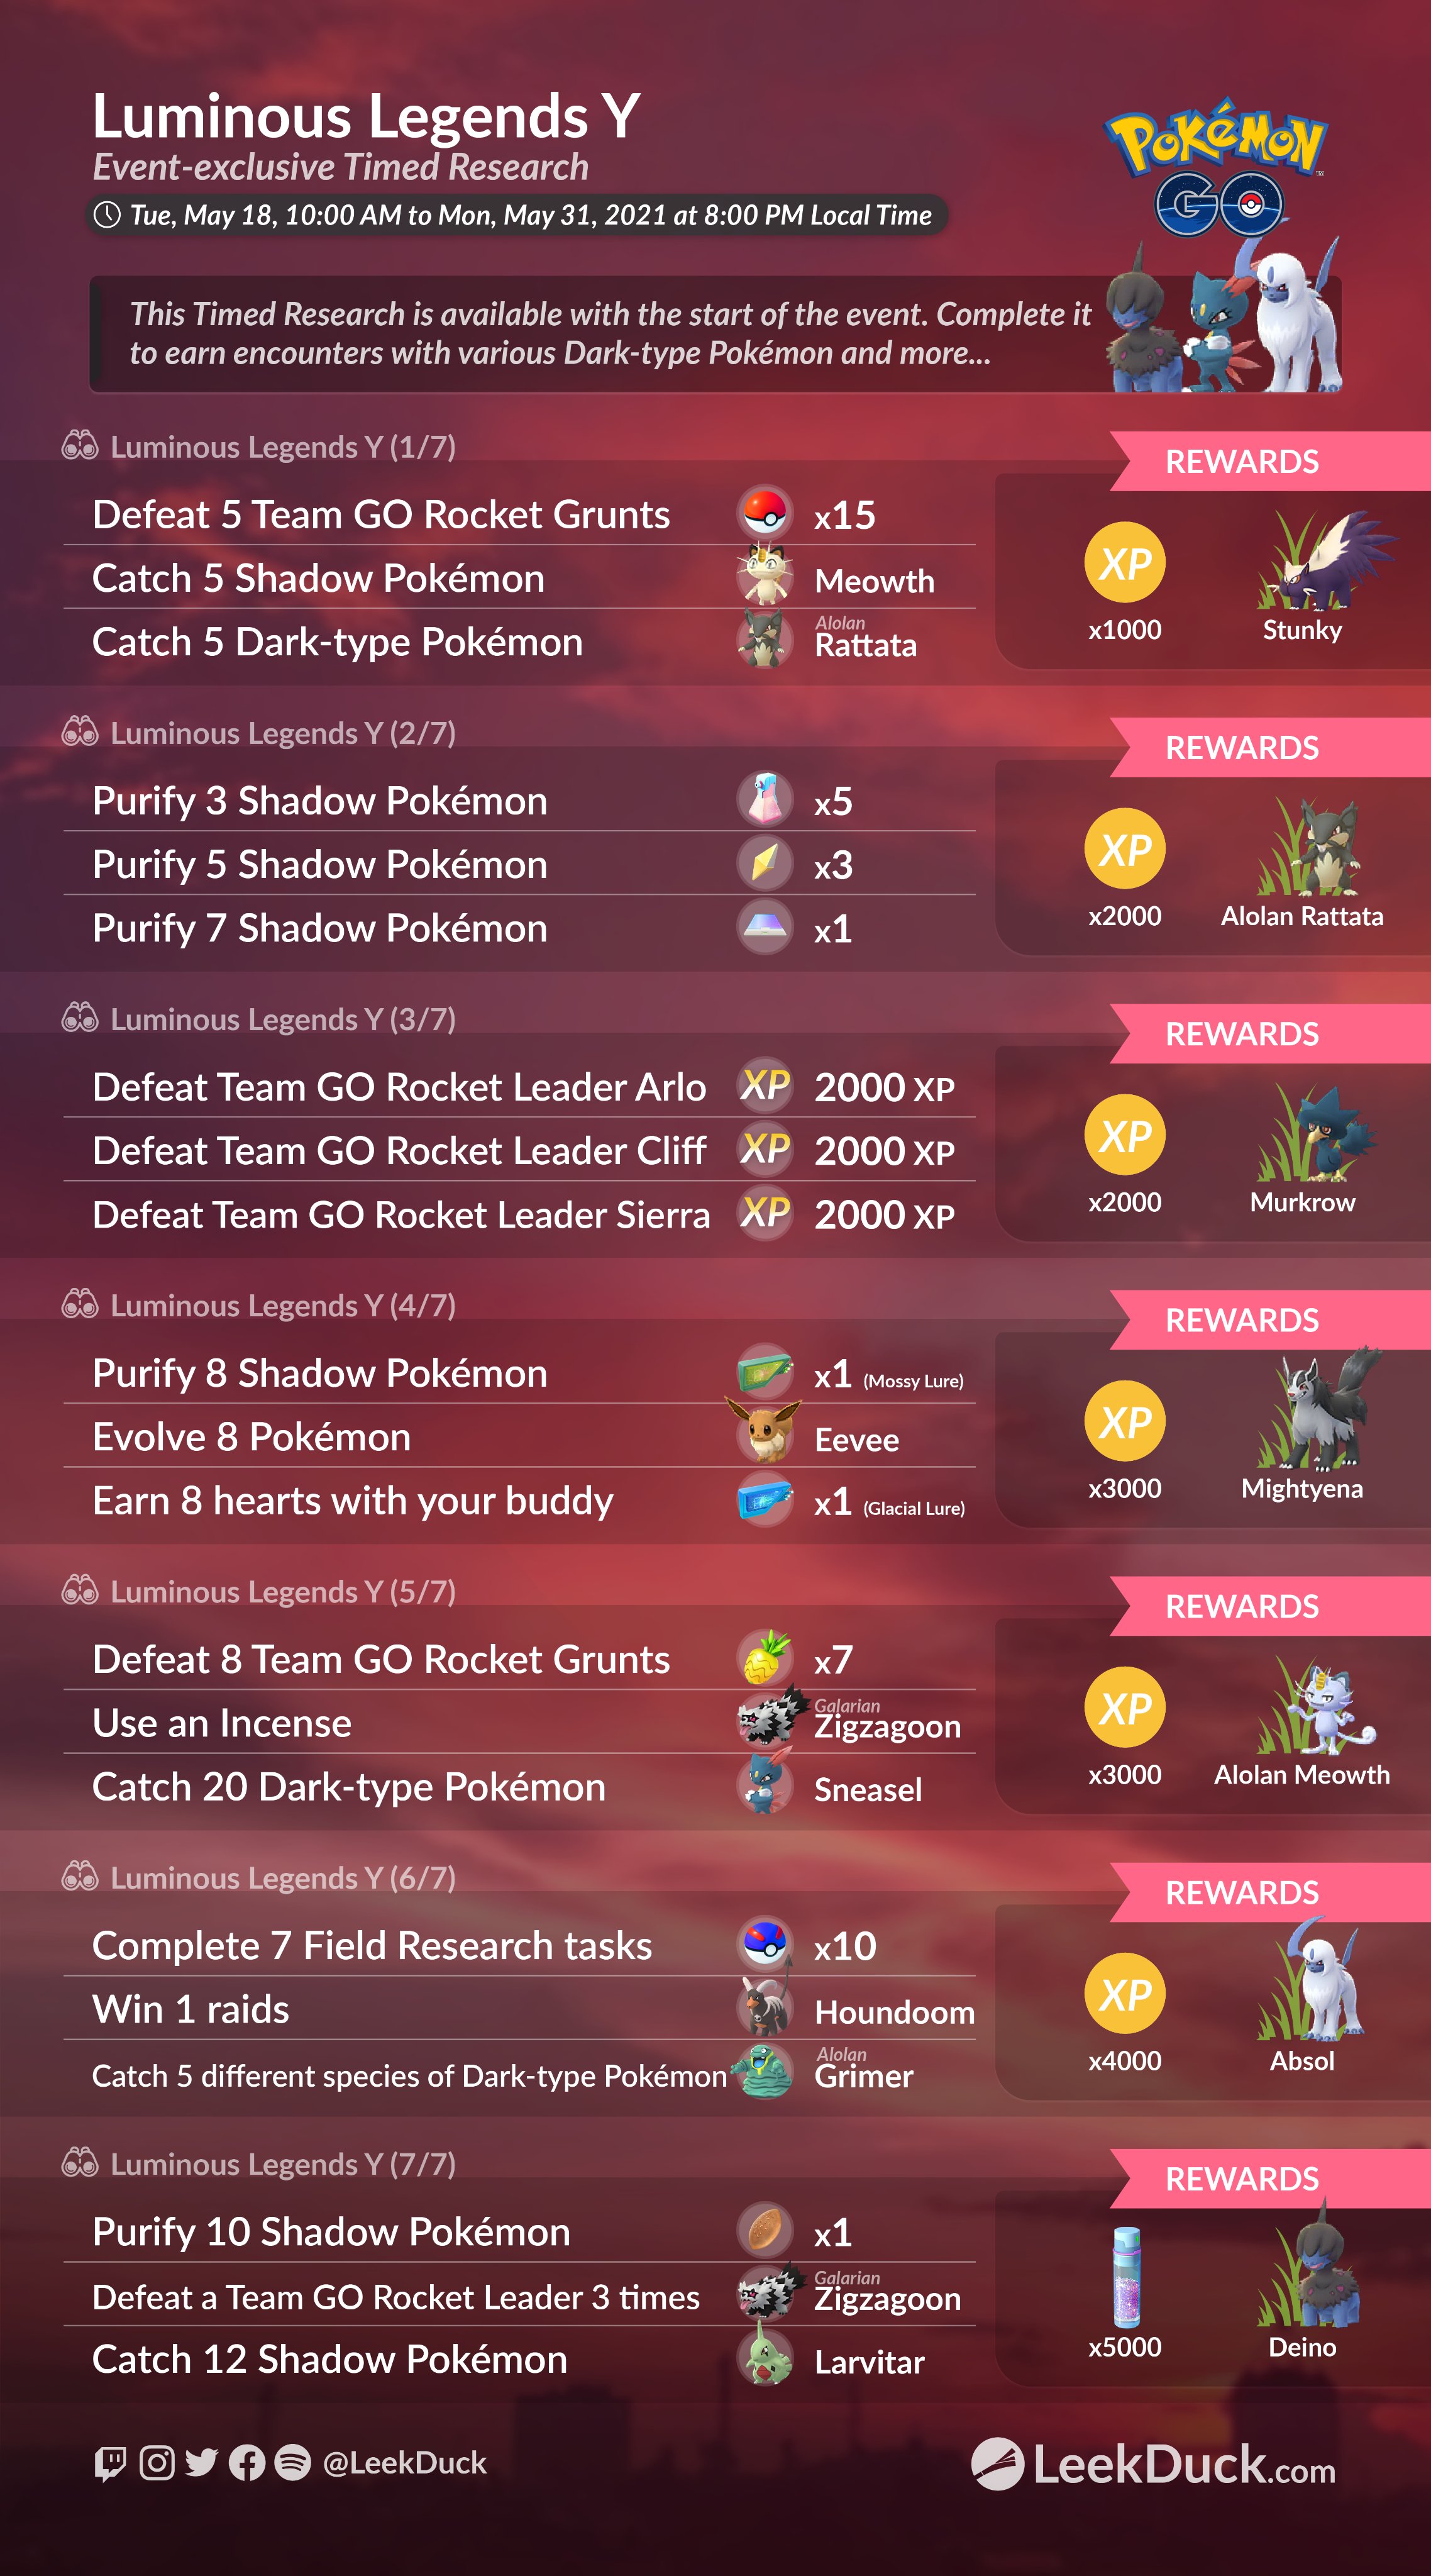 Leek Duck Luminous Legends Y Event Exclusive Timed Research If Unlocked Shiny Galarian Zigzagoon Will Be Available After Tuesday May 25 At 10 Am Full Details T Co 1gbwdbh7sc T Co Kyjdgt7ykj